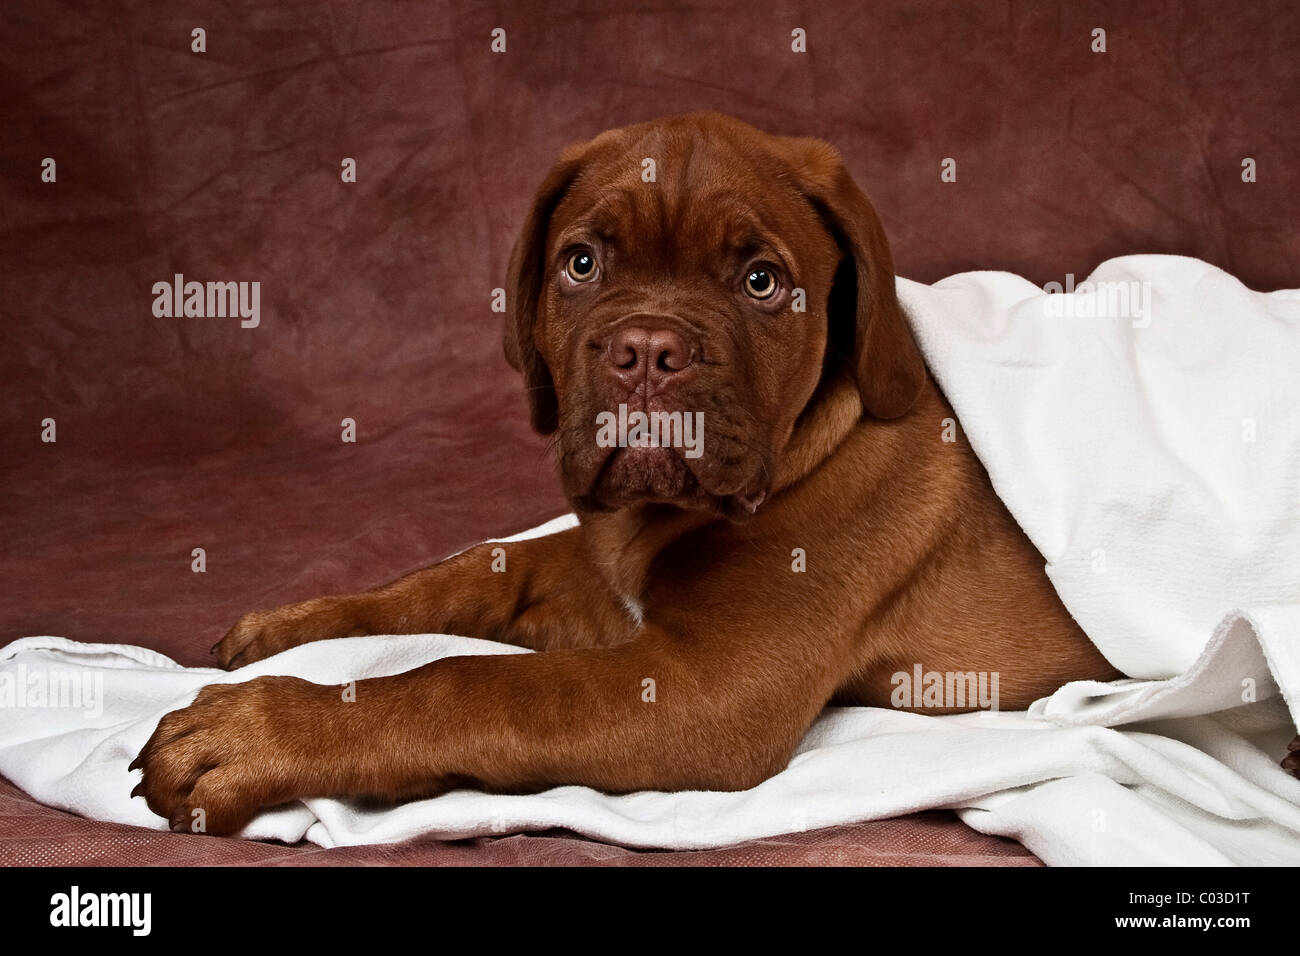 Bordeaux Mastiff or French Mastiff puppy wrapped in a white blanket Stock Photo